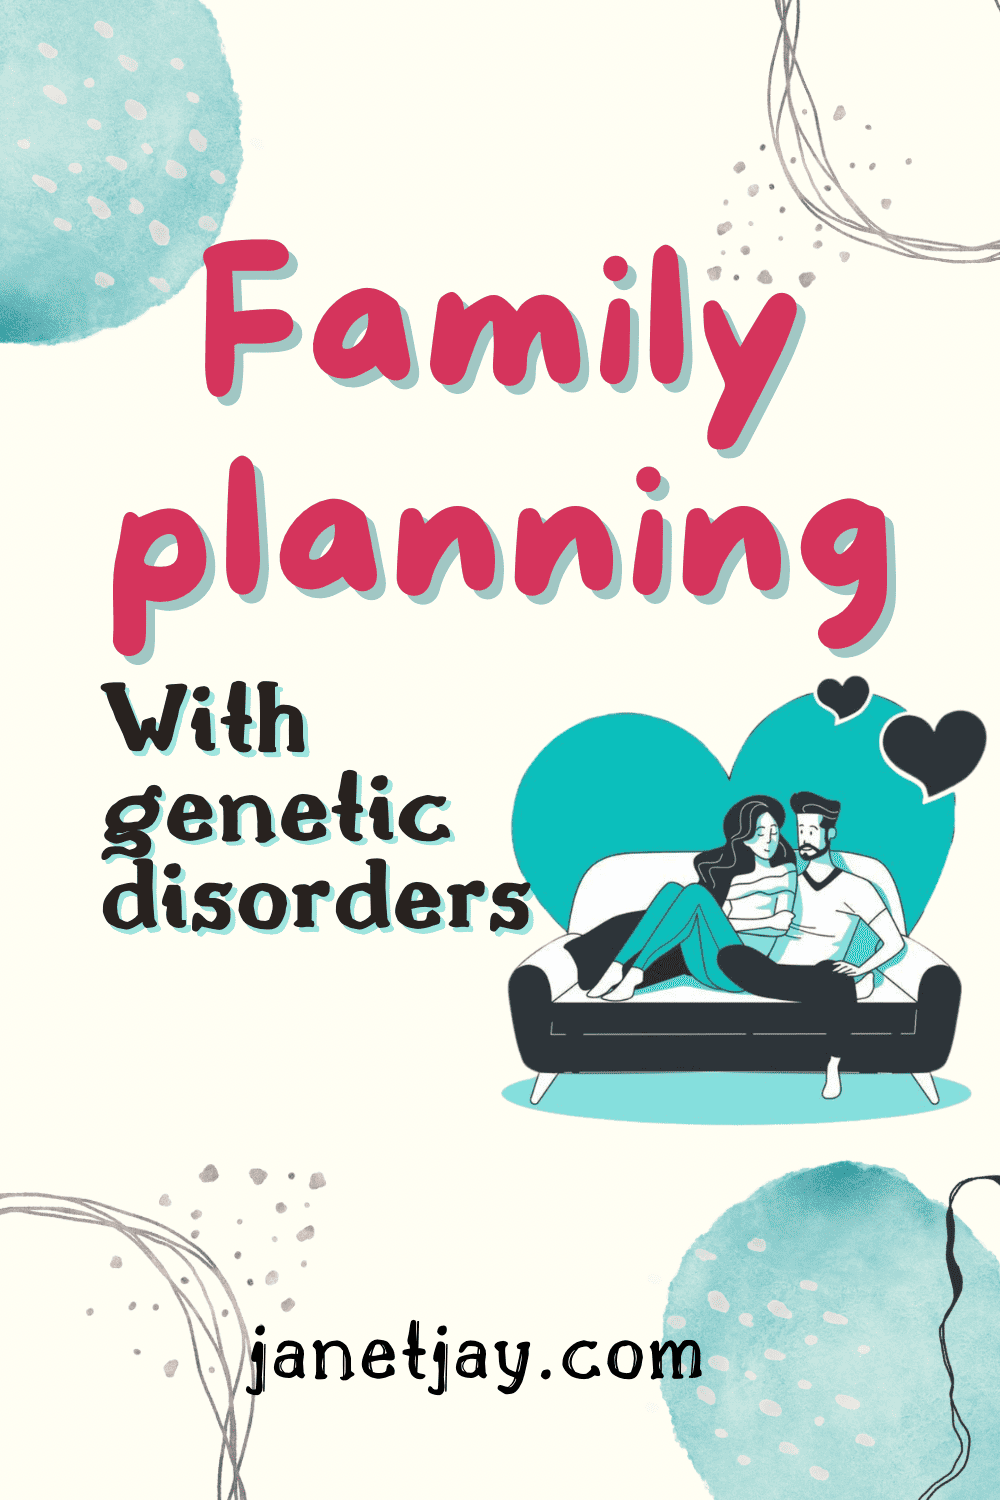 "Family planning with genetic disorders" and "janetjay.com" on an abstract background of teal and grey splotches, with a cartoon of a man and woman on a couch surrounded by hearts